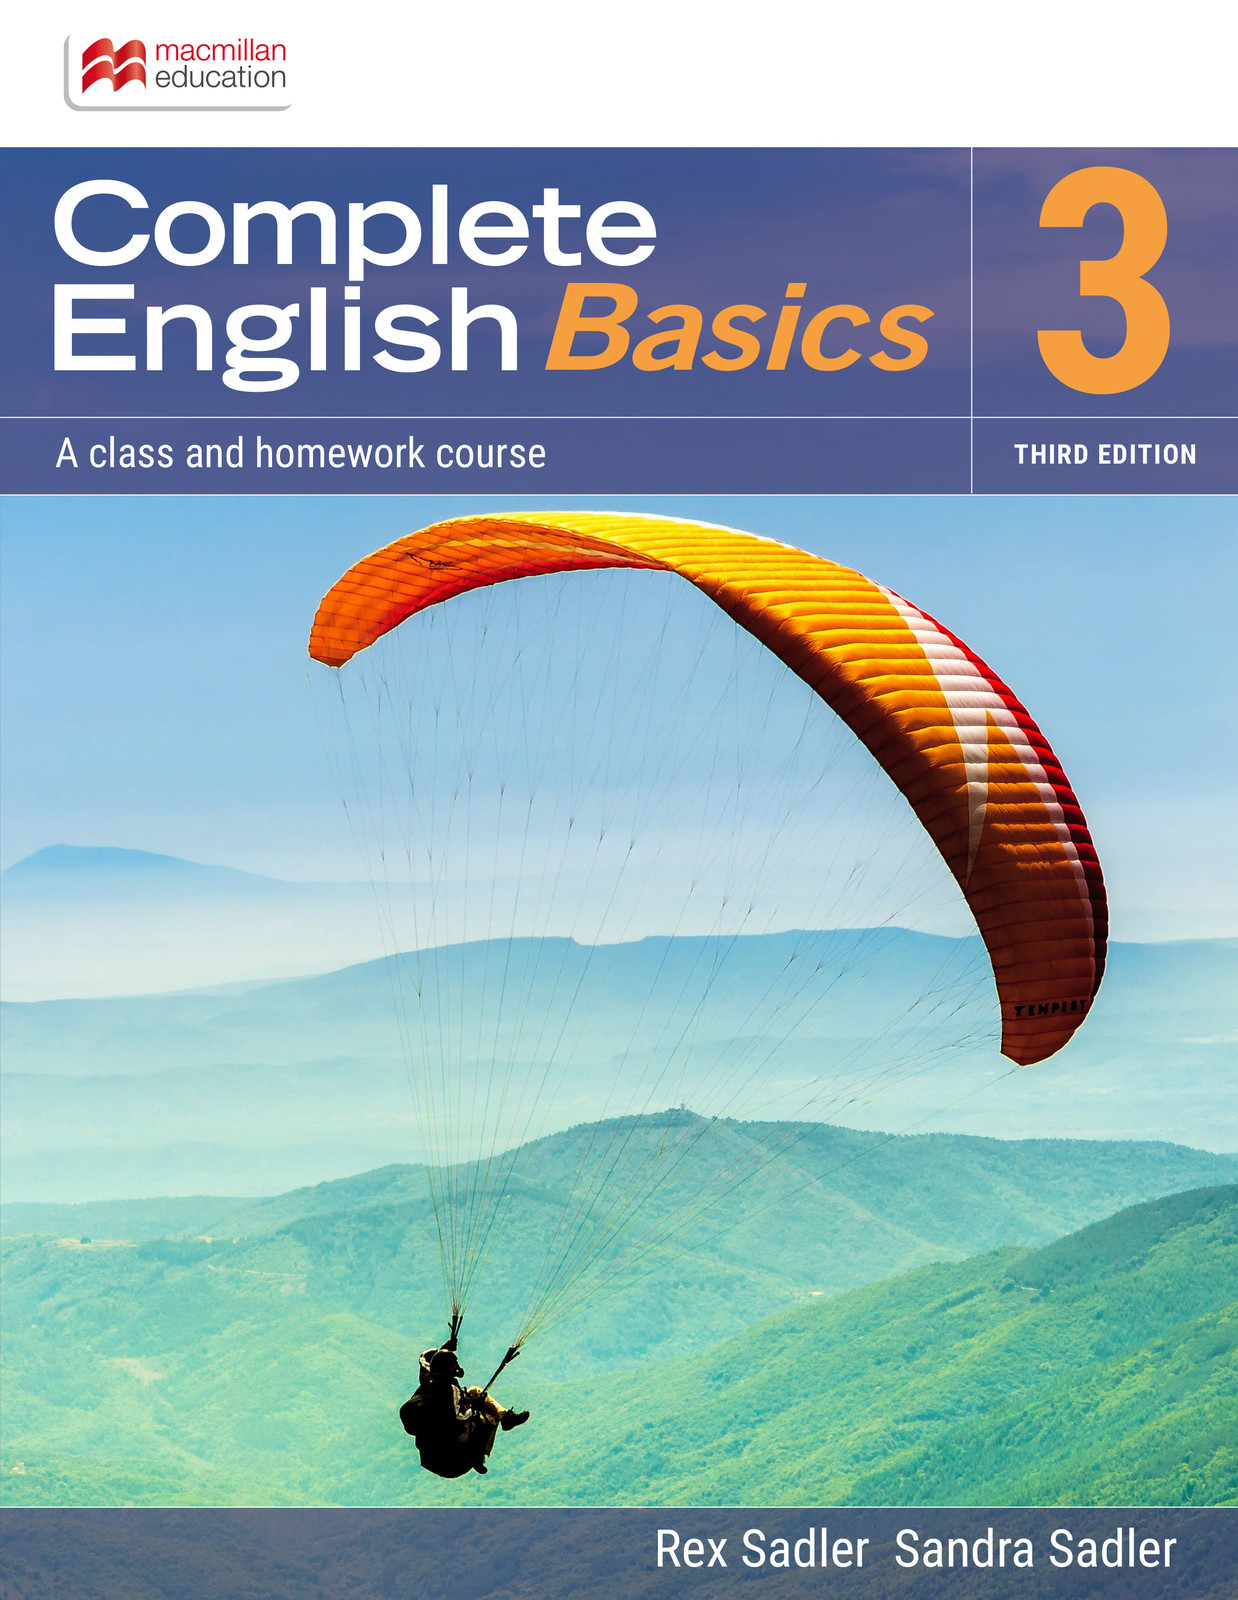 Complete English Basics 3 Student Book (3rd Edition) Macmillan Educational Resources and